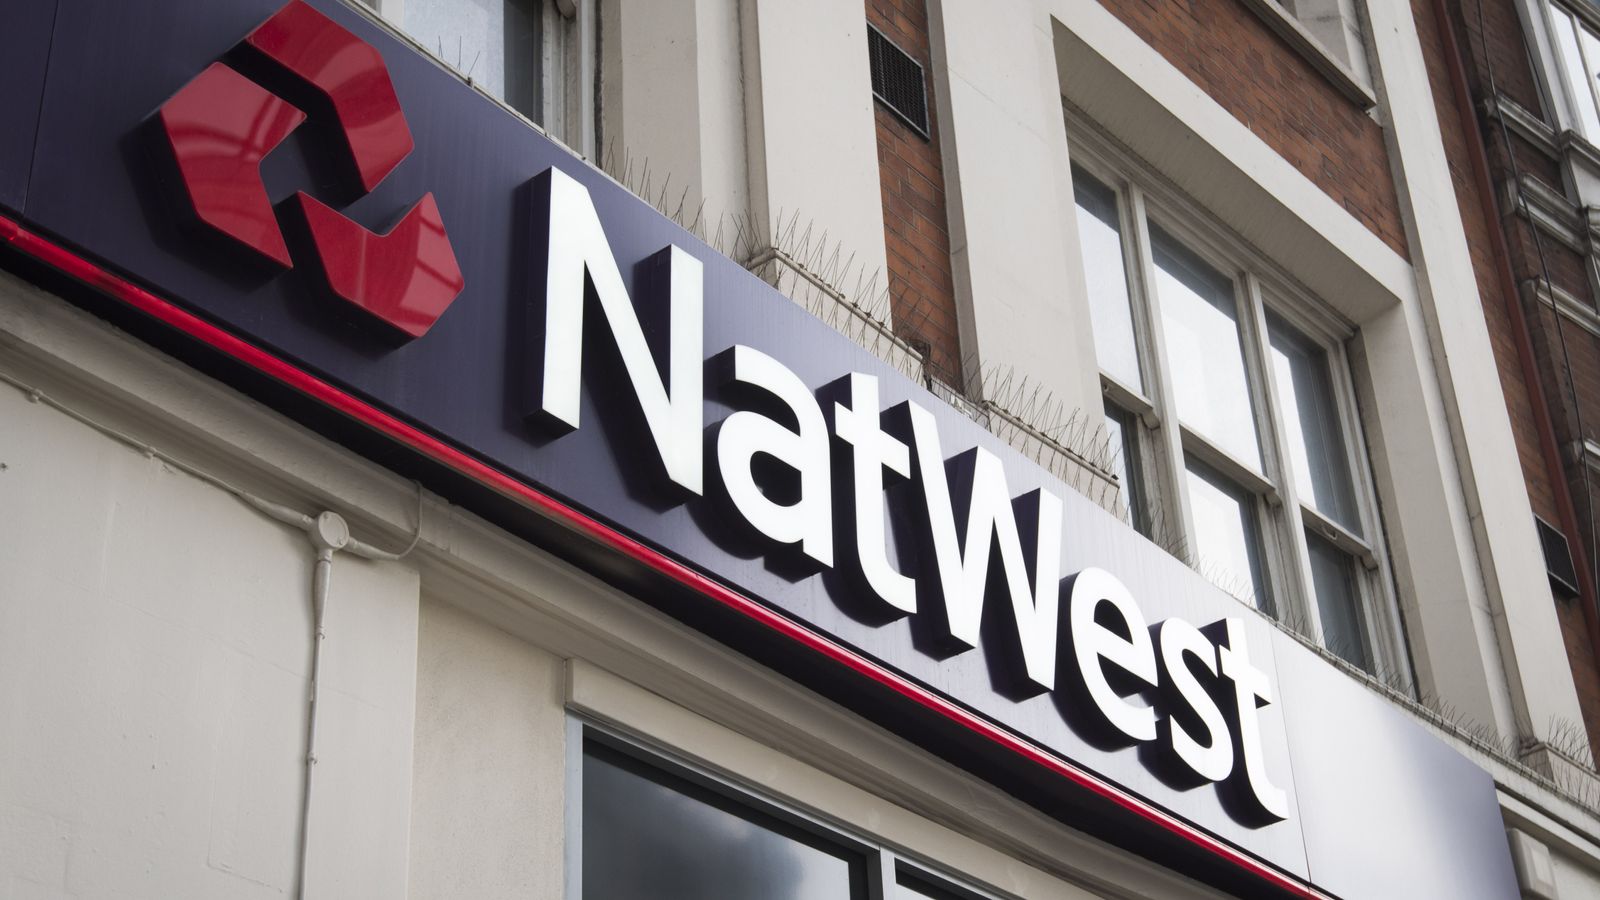 Haythornthwaite lined up to replace Davies as NatWest chairman